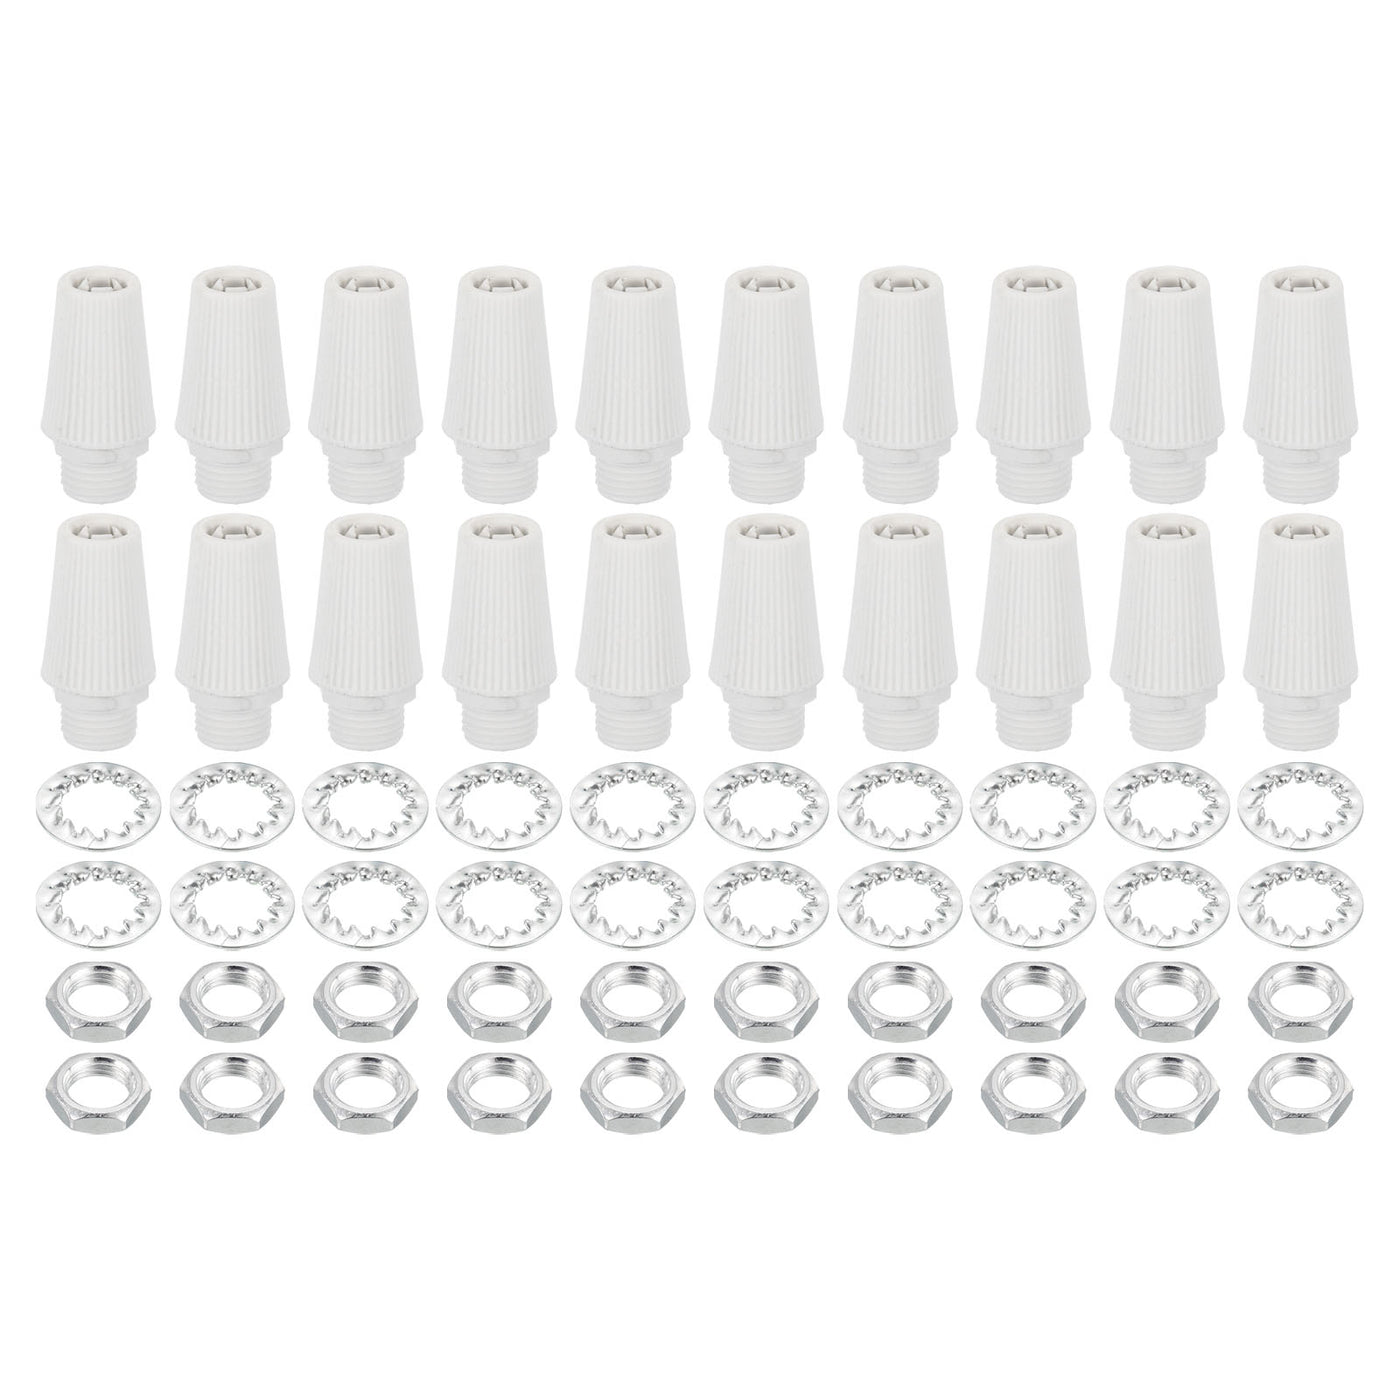 Harfington Lighting Cord Grips Connector,Carbon Steel Light Cable Glands,20Pcs,White